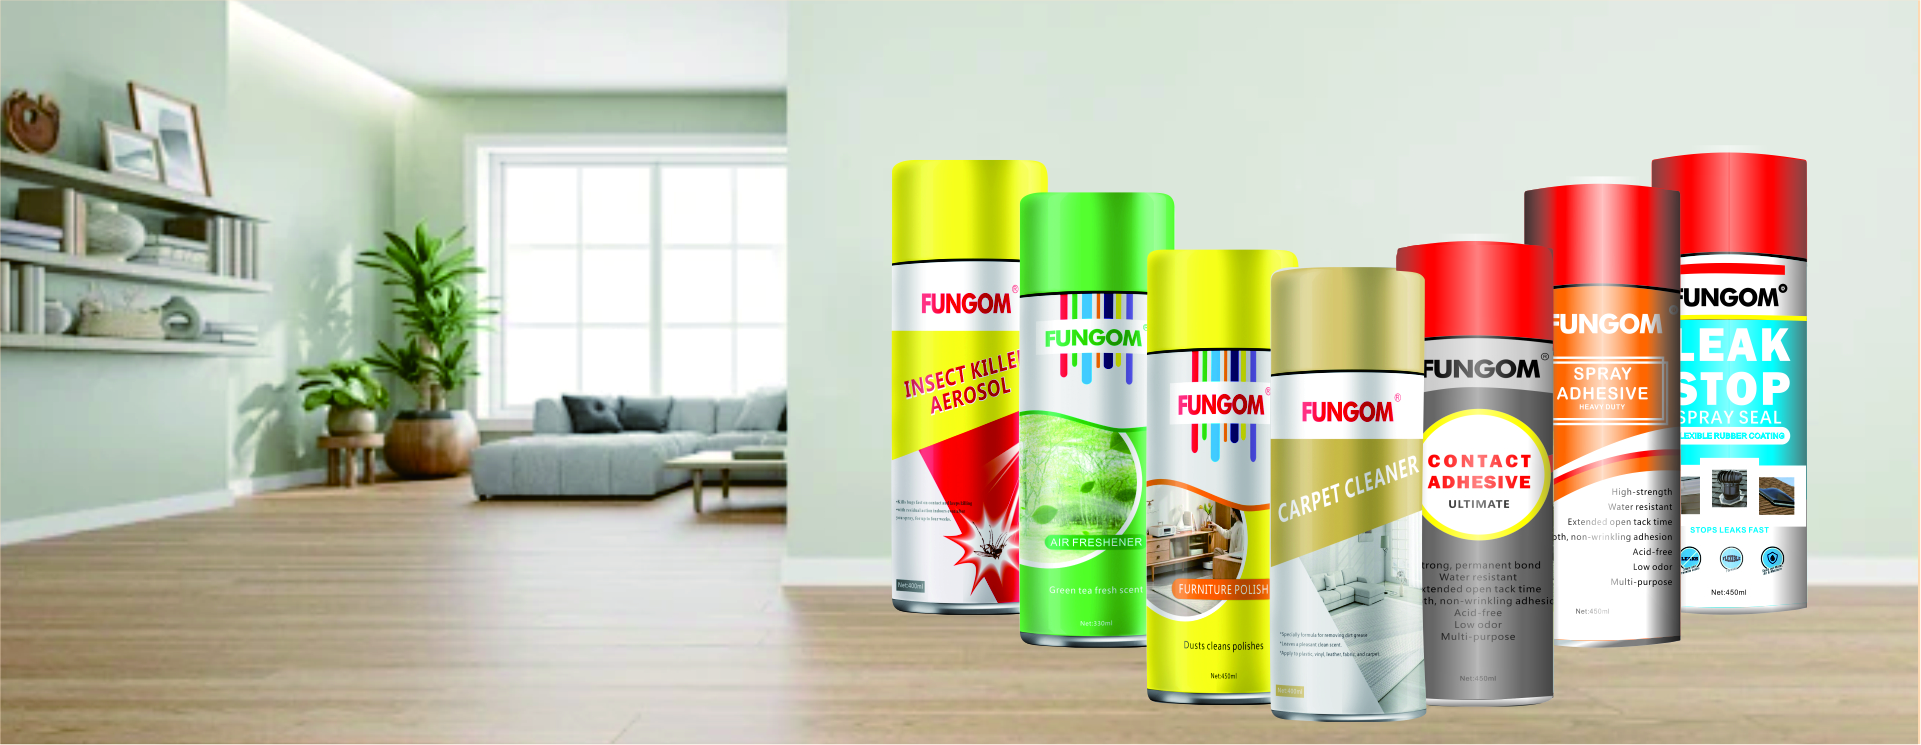 FUNGOM Household Care Products